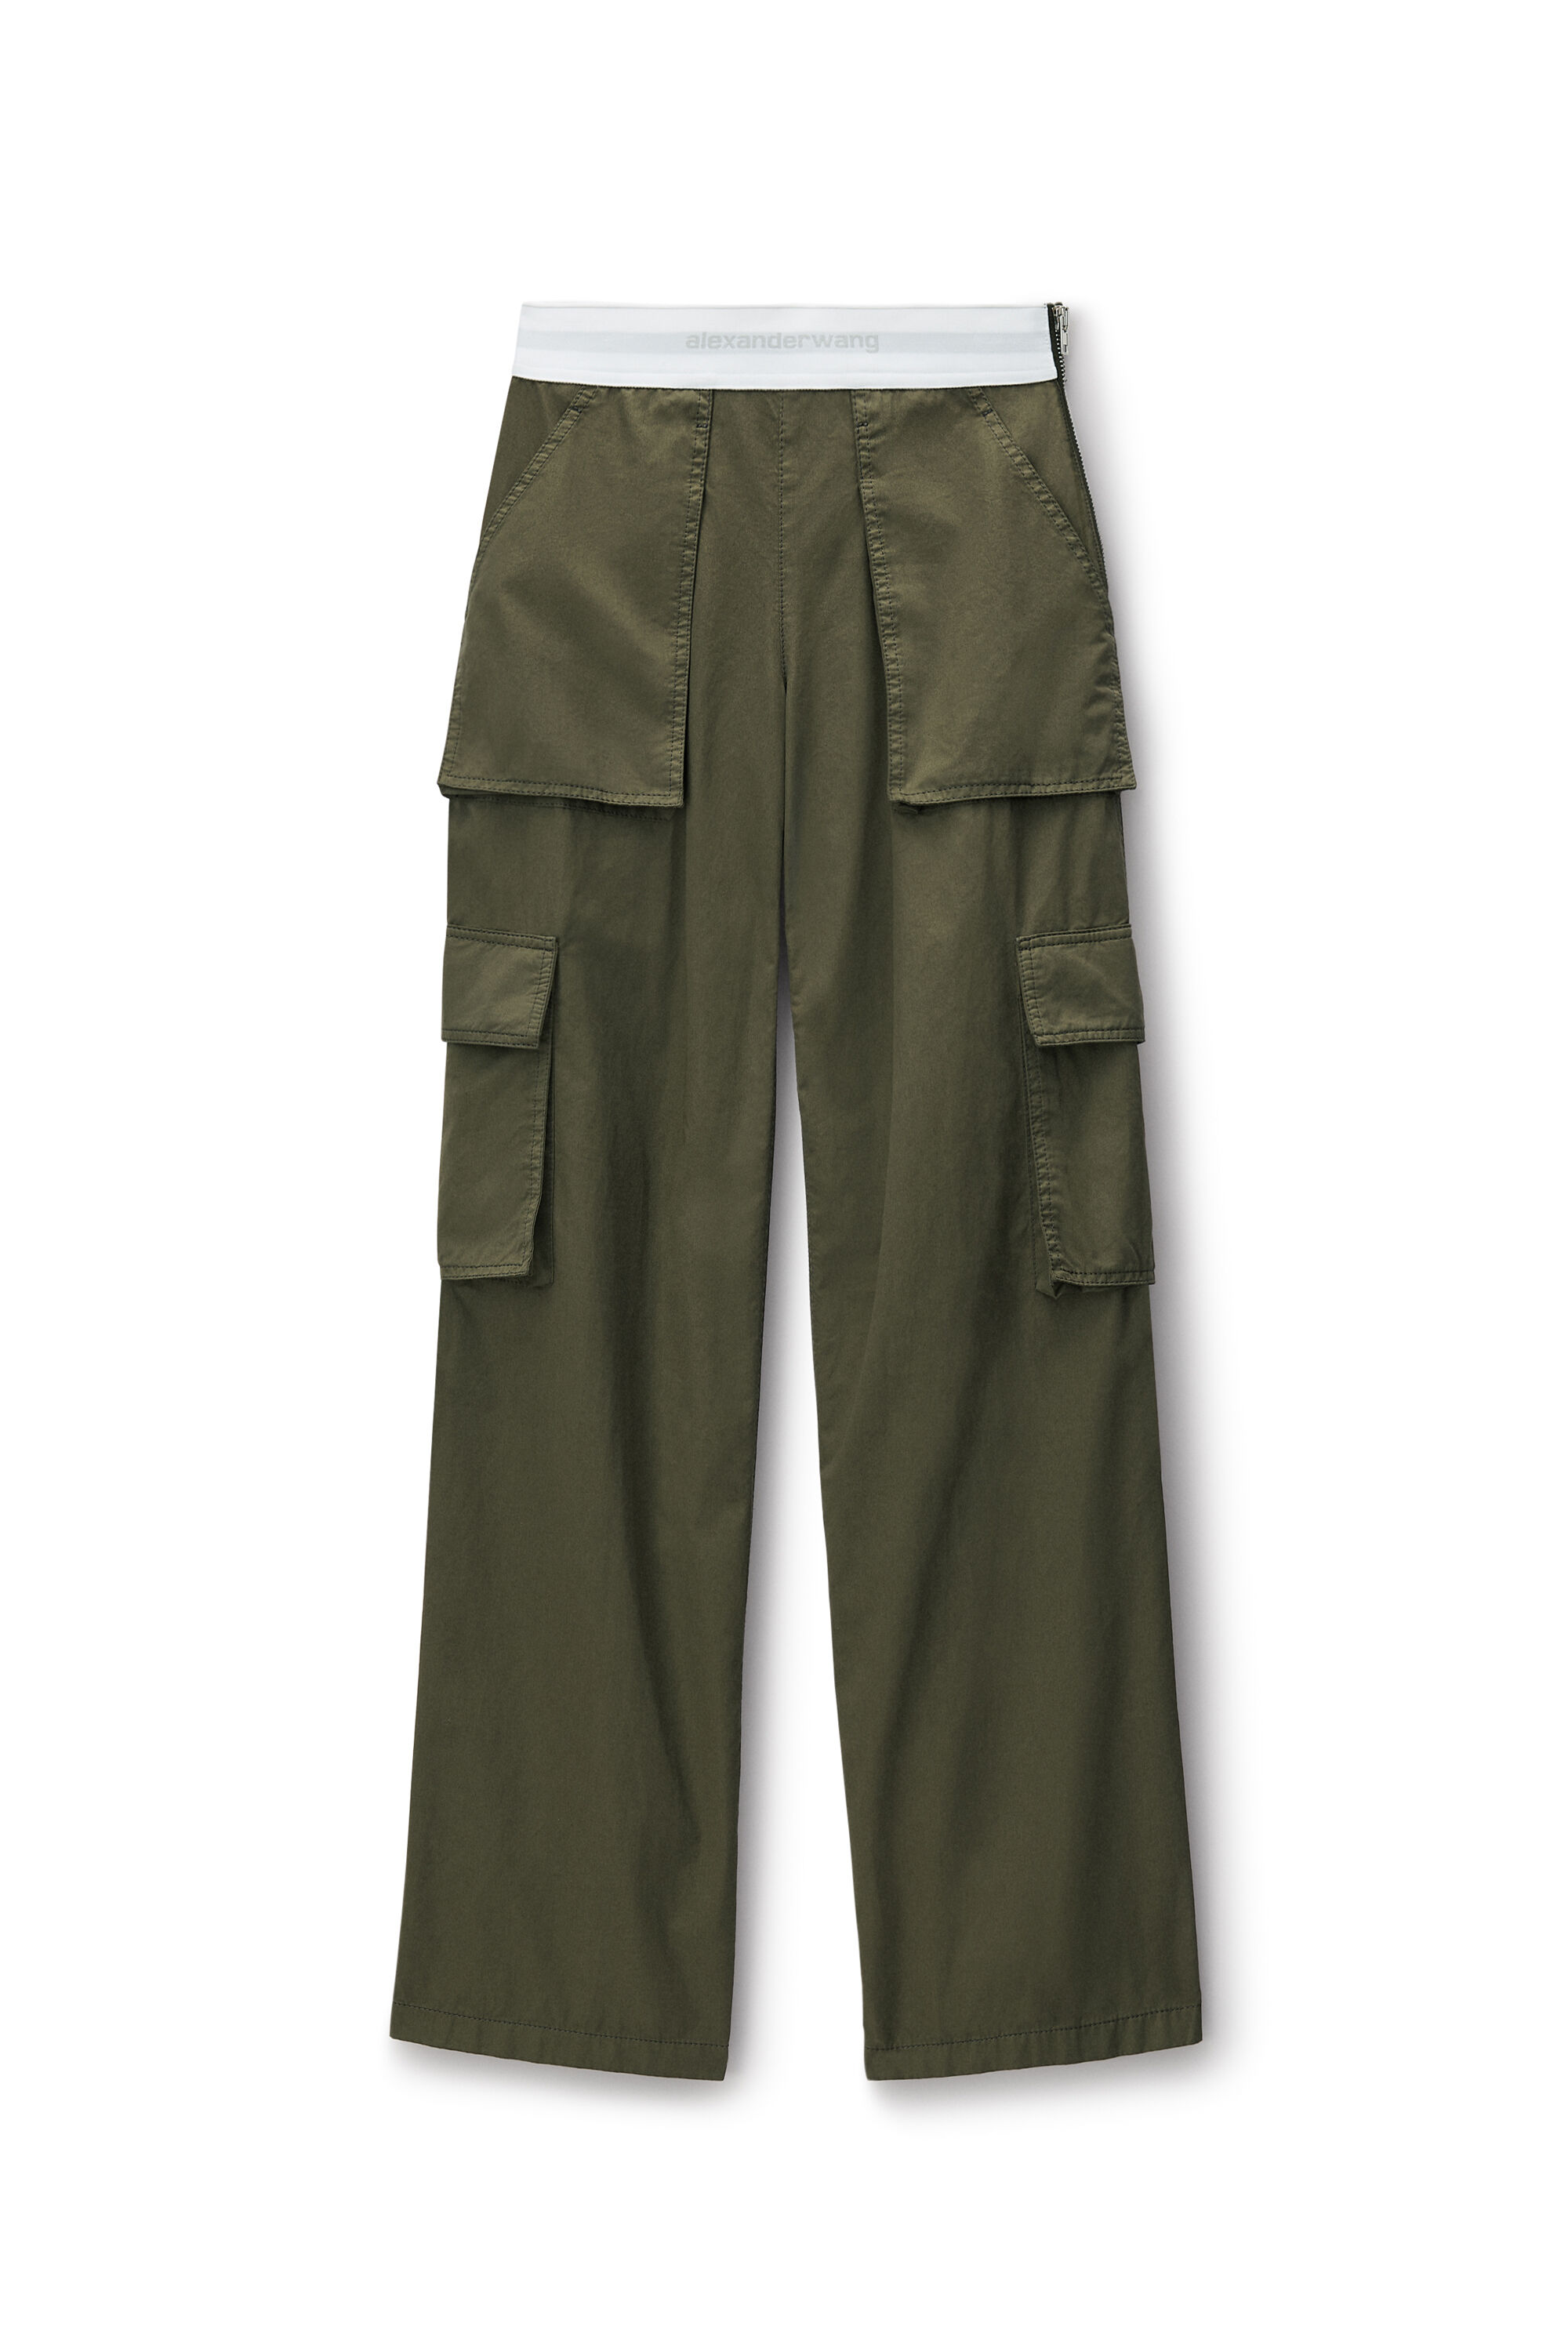 alexanderwang mid-rise cargo rave pants in cotton twill ARMY GREEN 